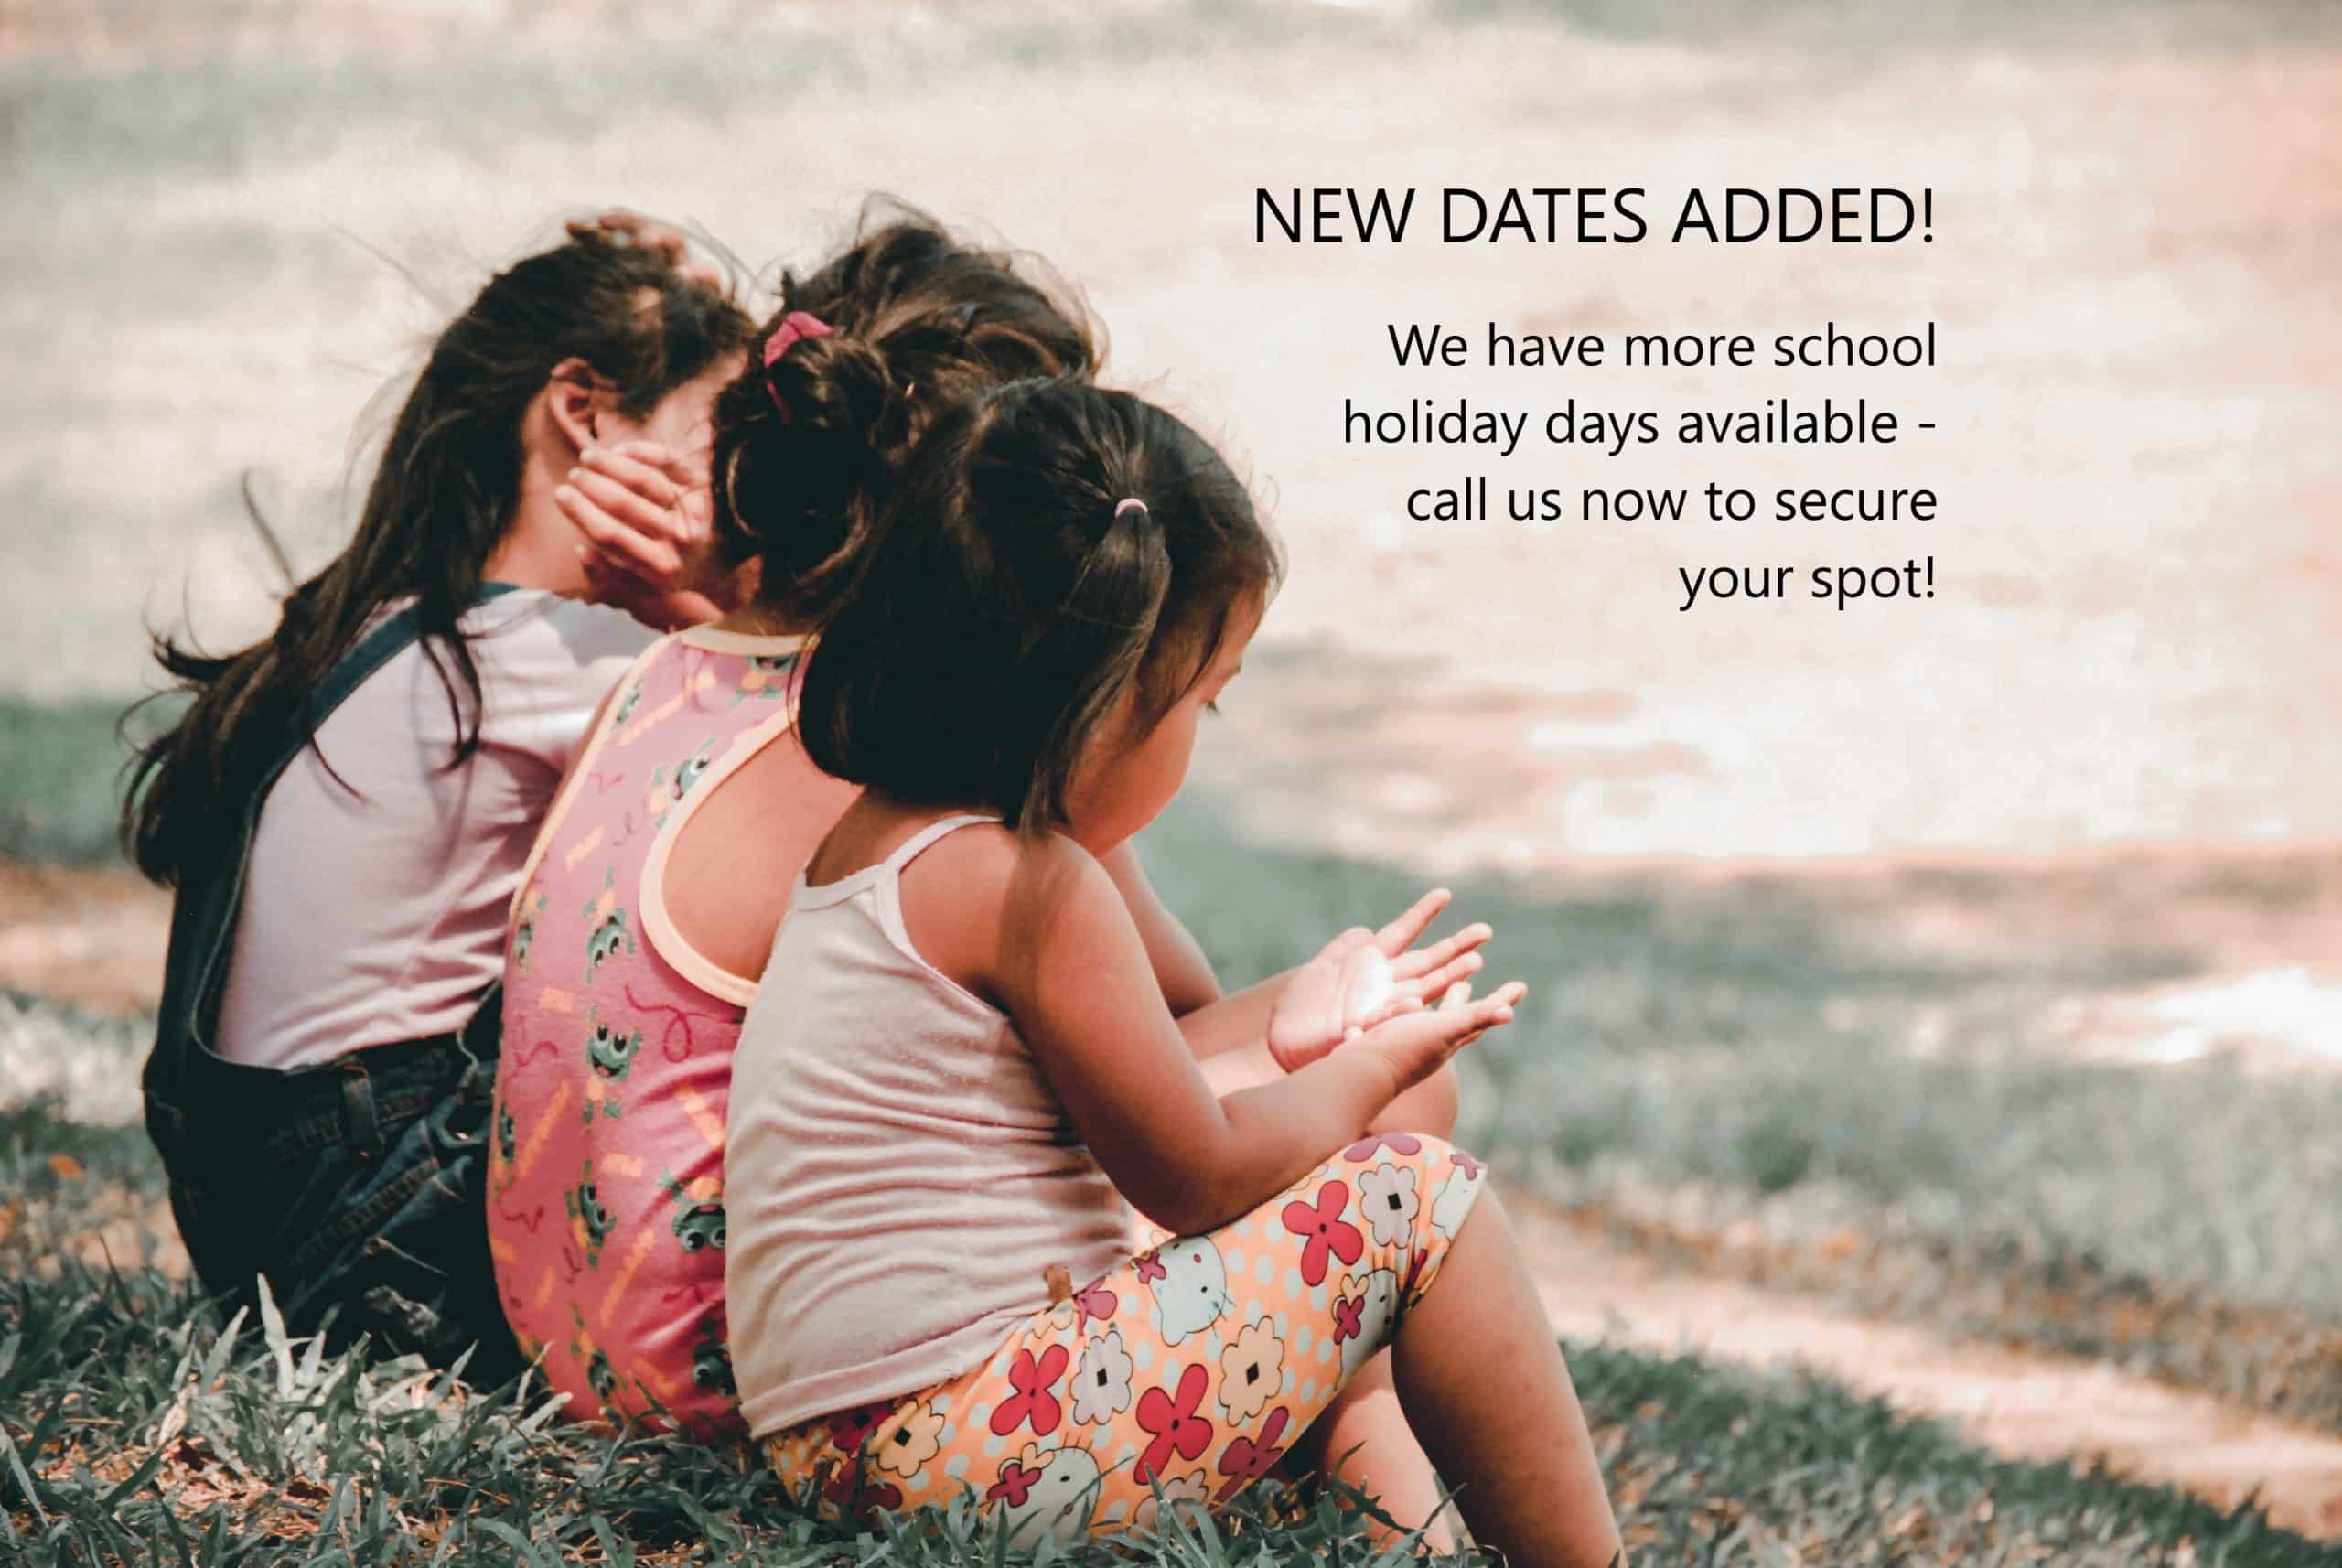 children sitting on hill with overlay text for school holiday appointments